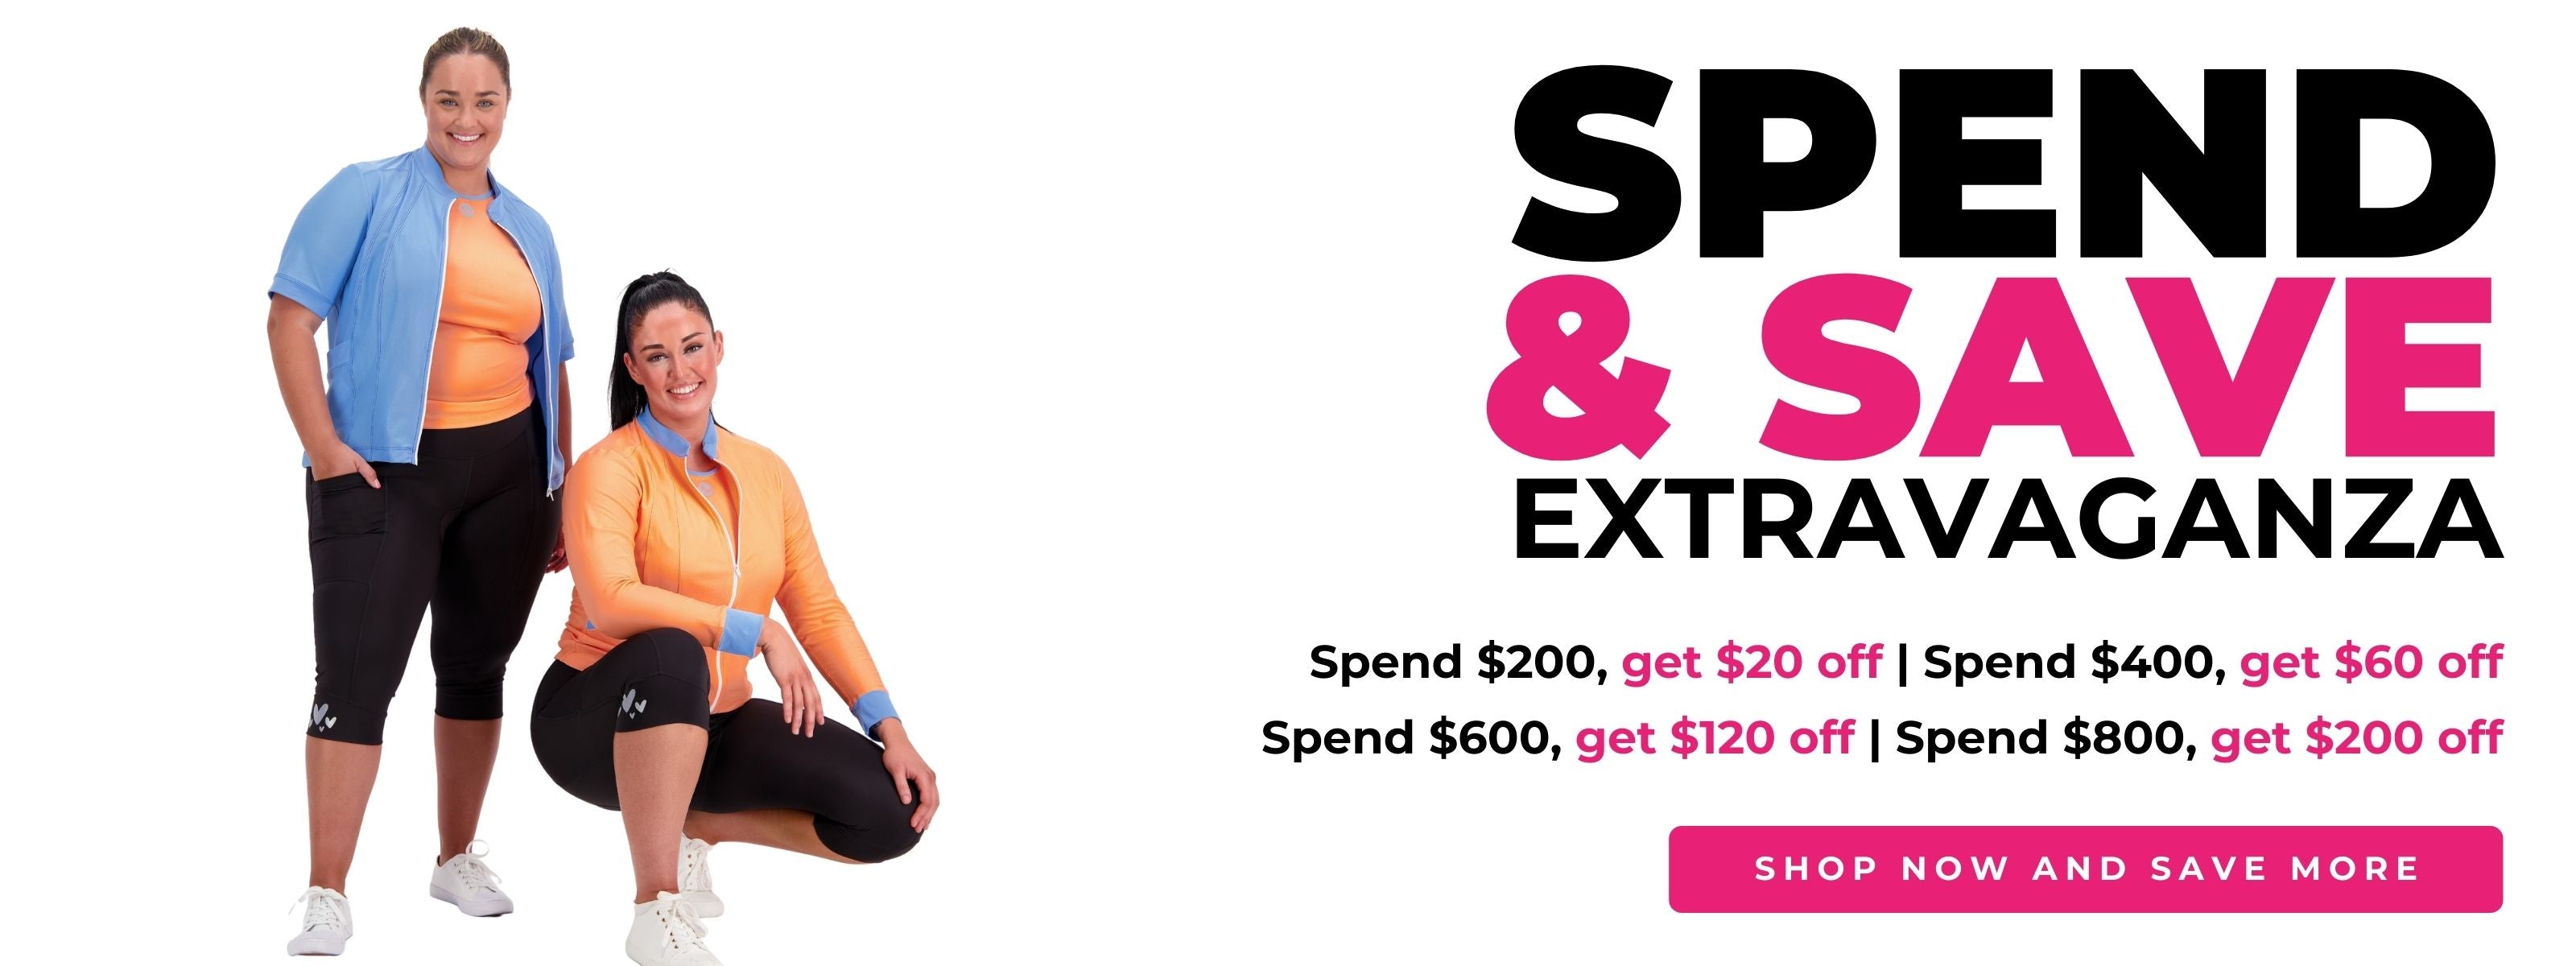 Spend and Save Extravaganza